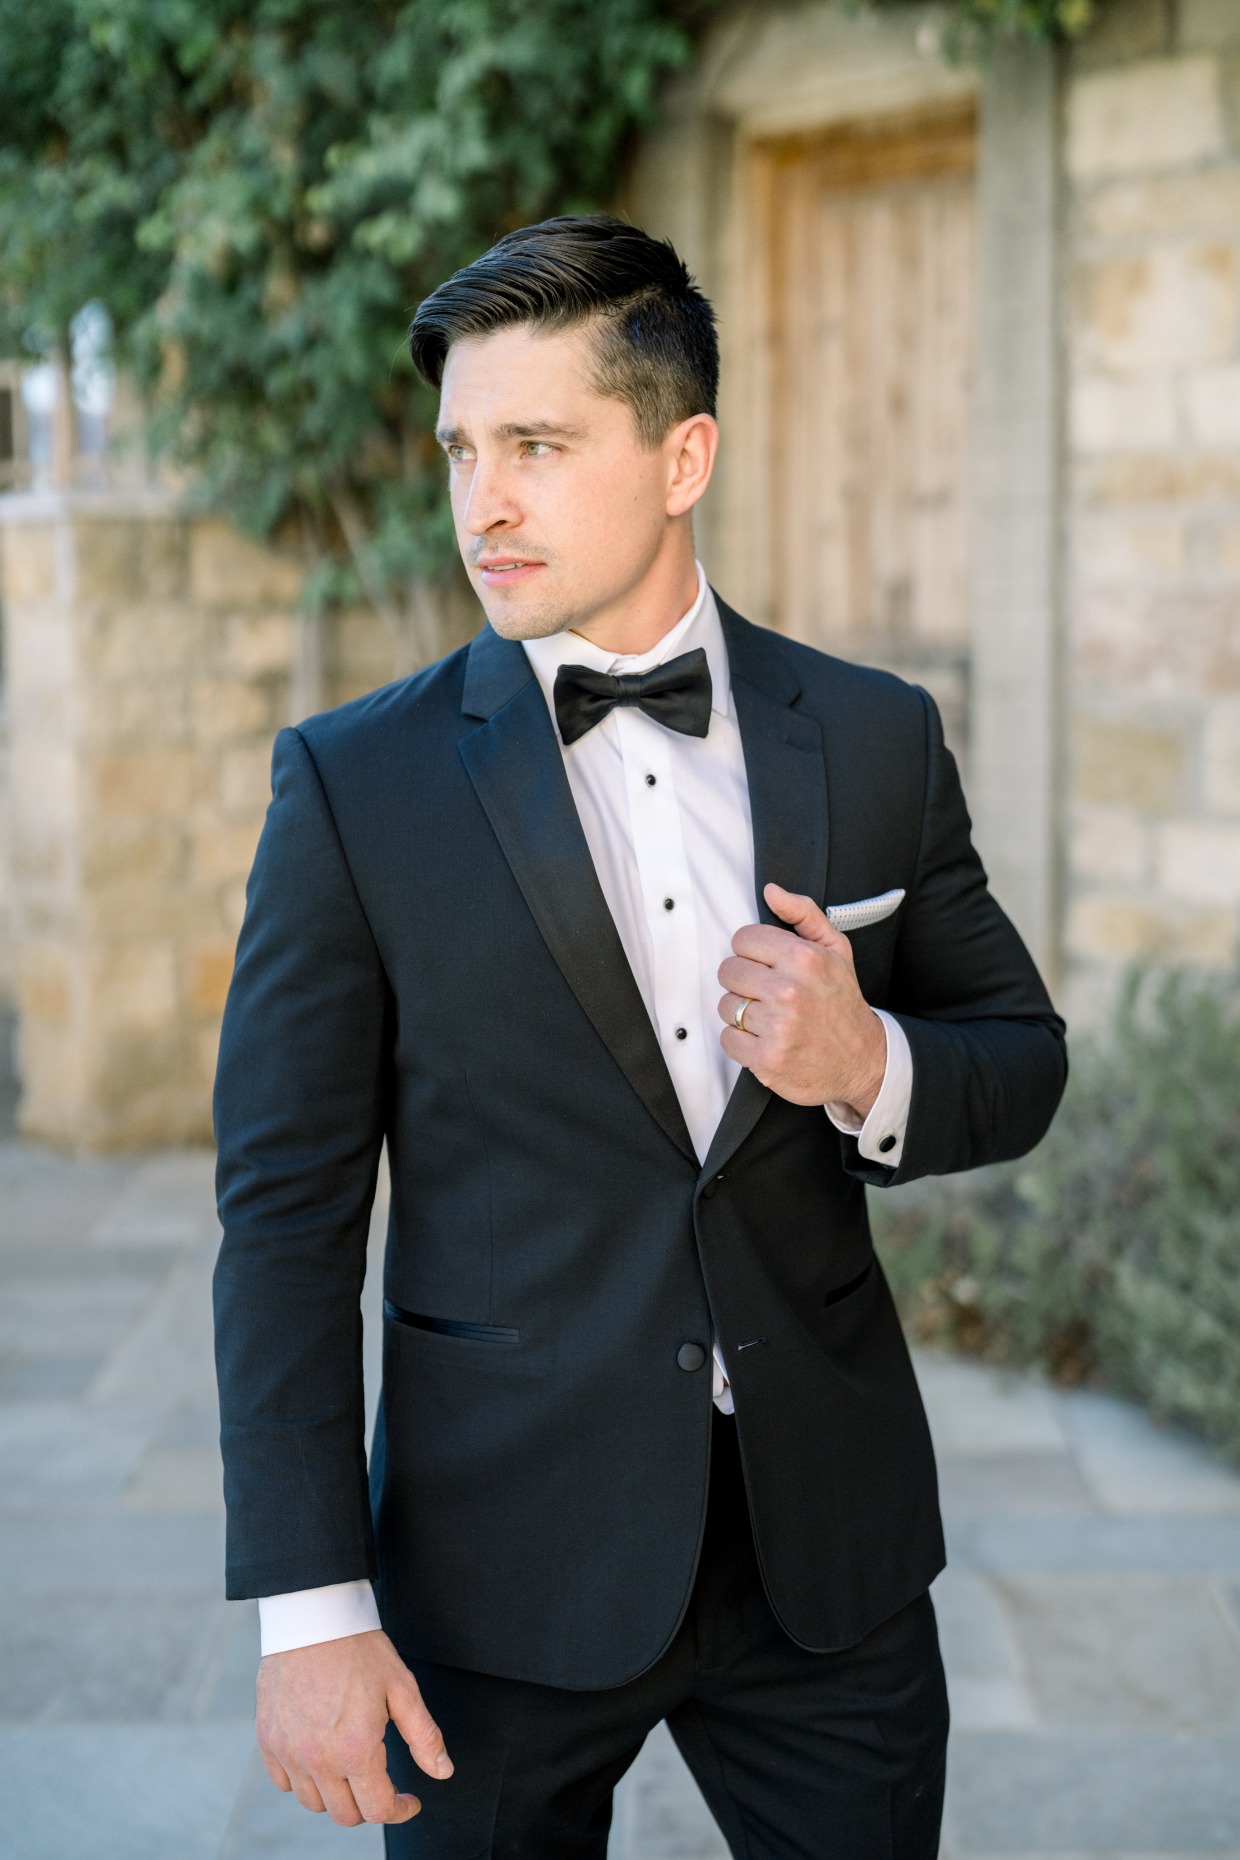 classic tuxedo from stitch and tie